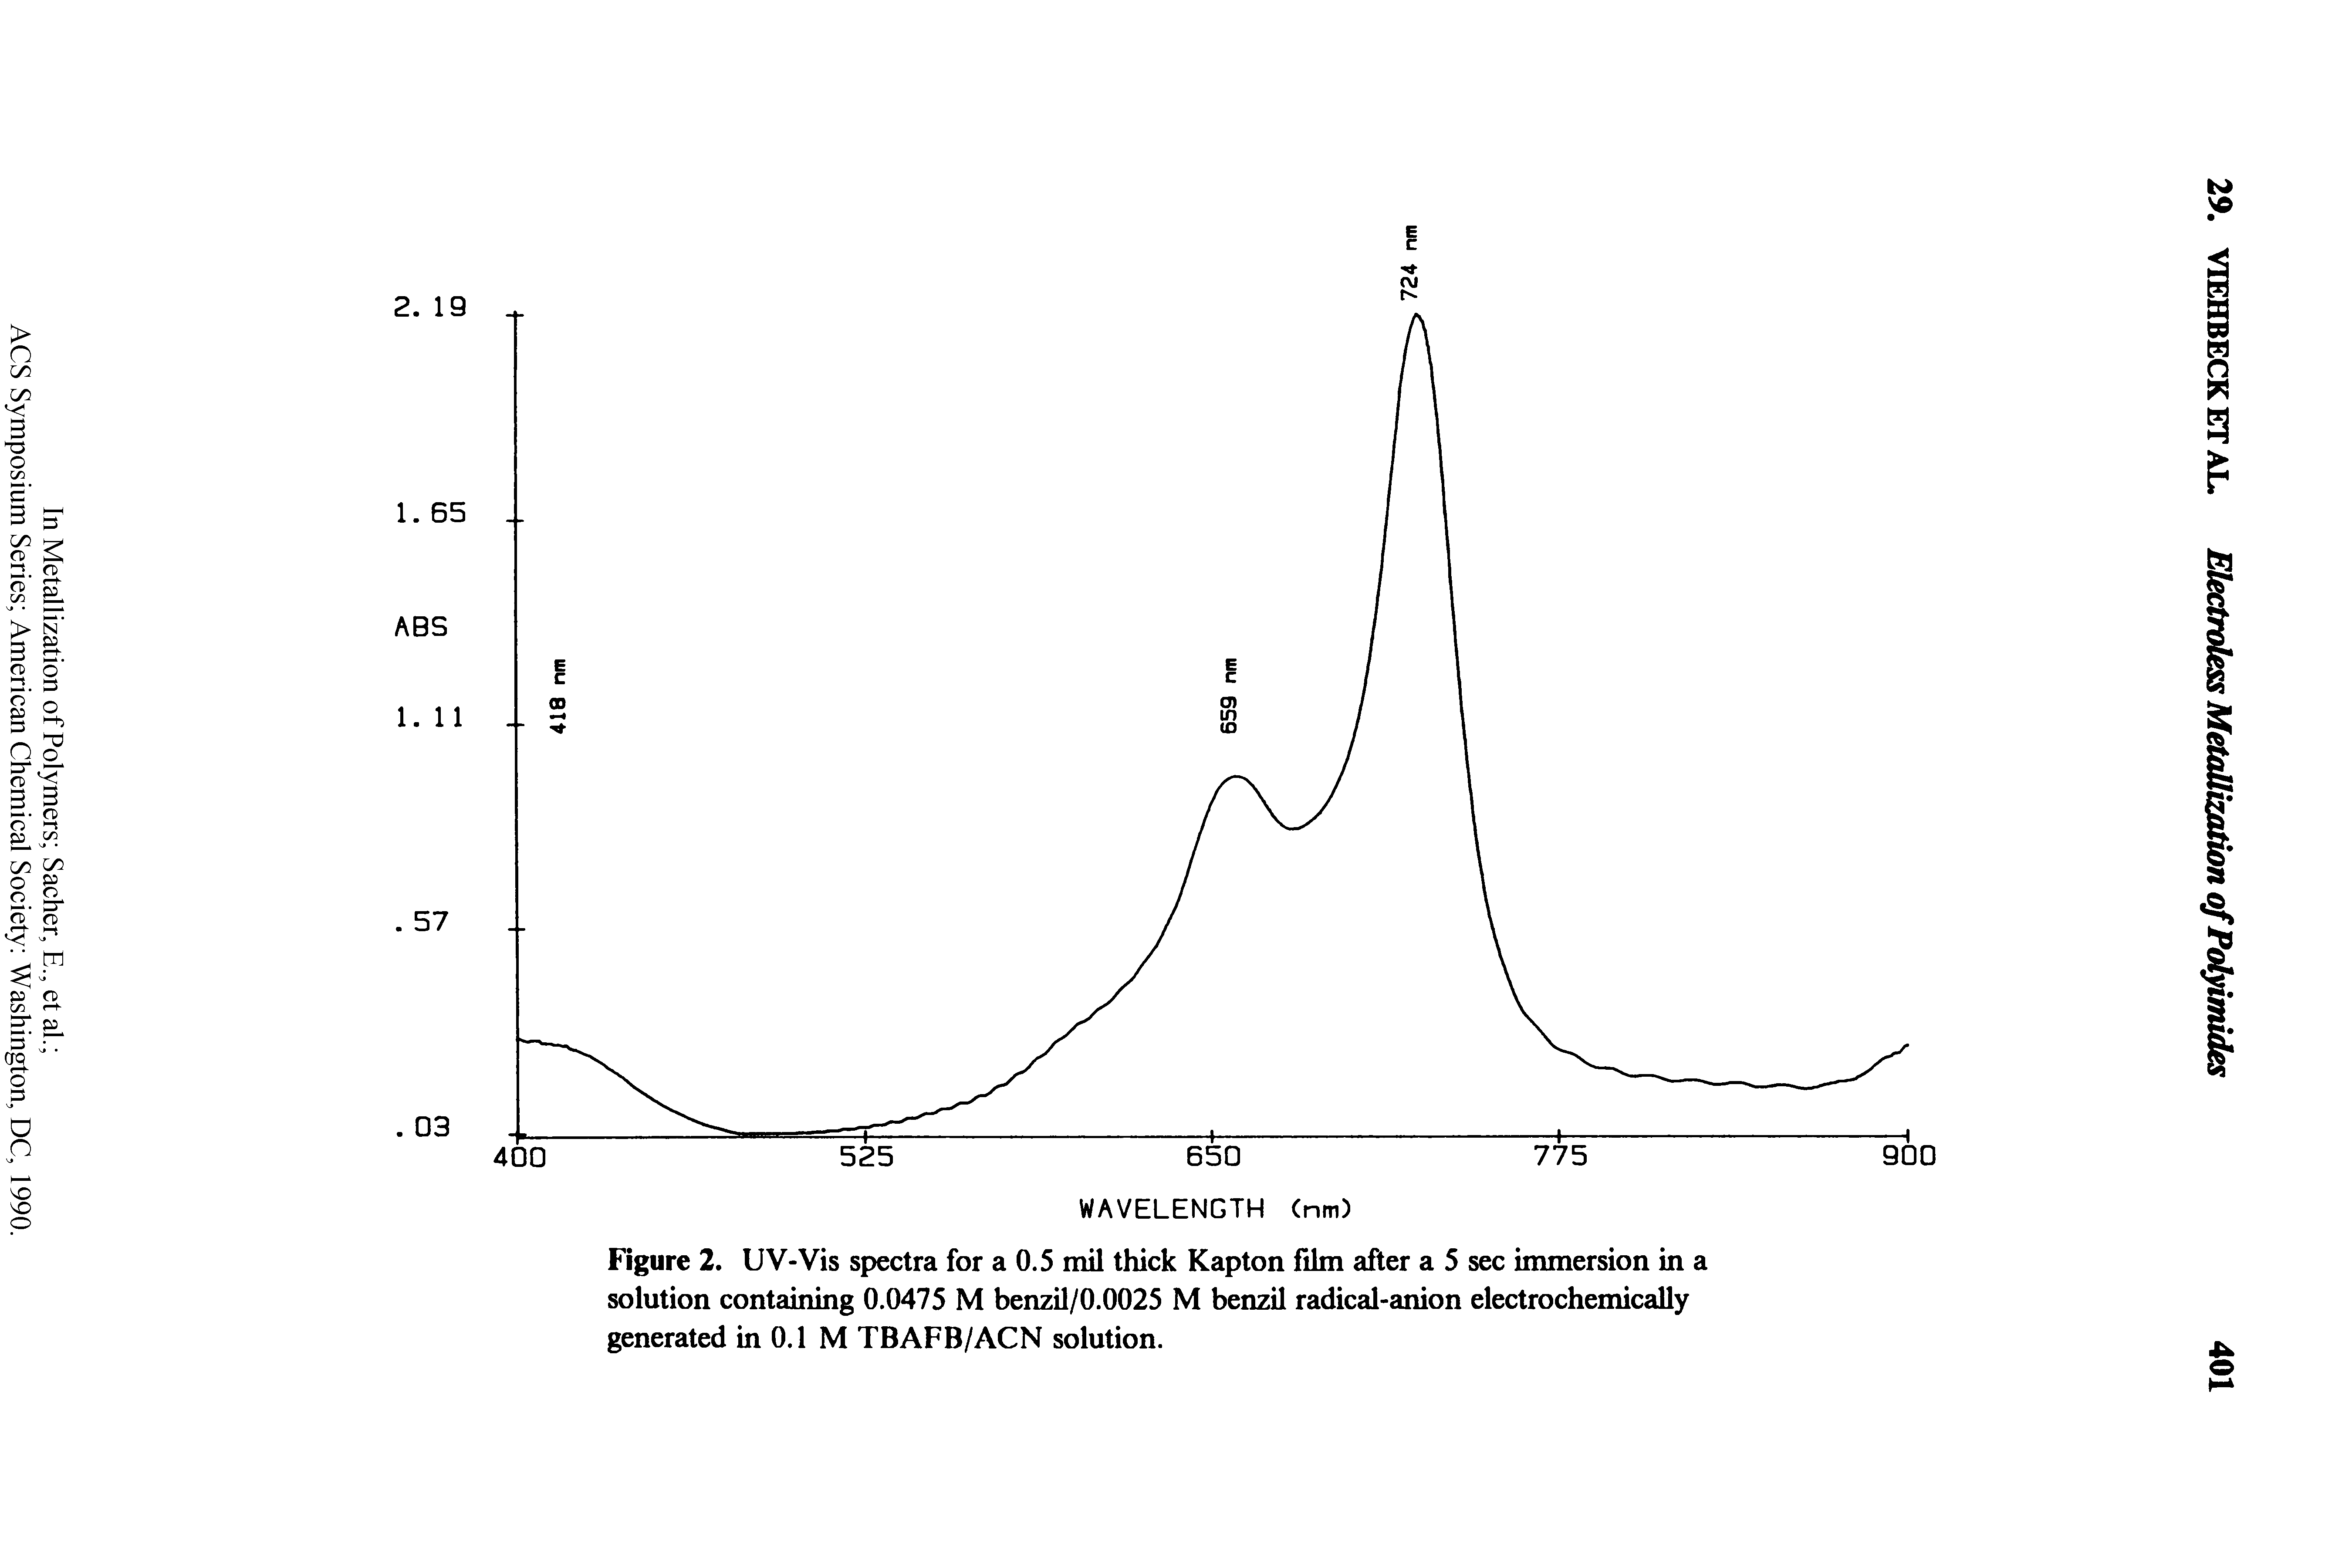 Figure 2. UV-Vis spectra for a 0.5 mil thick Kapton film after a 5 sec immersion in a solution containing 0.0475 M benzil/0.0025 M benzil radical-anion electrochemically generated in 0.1 M TBAFB/ACN solution.